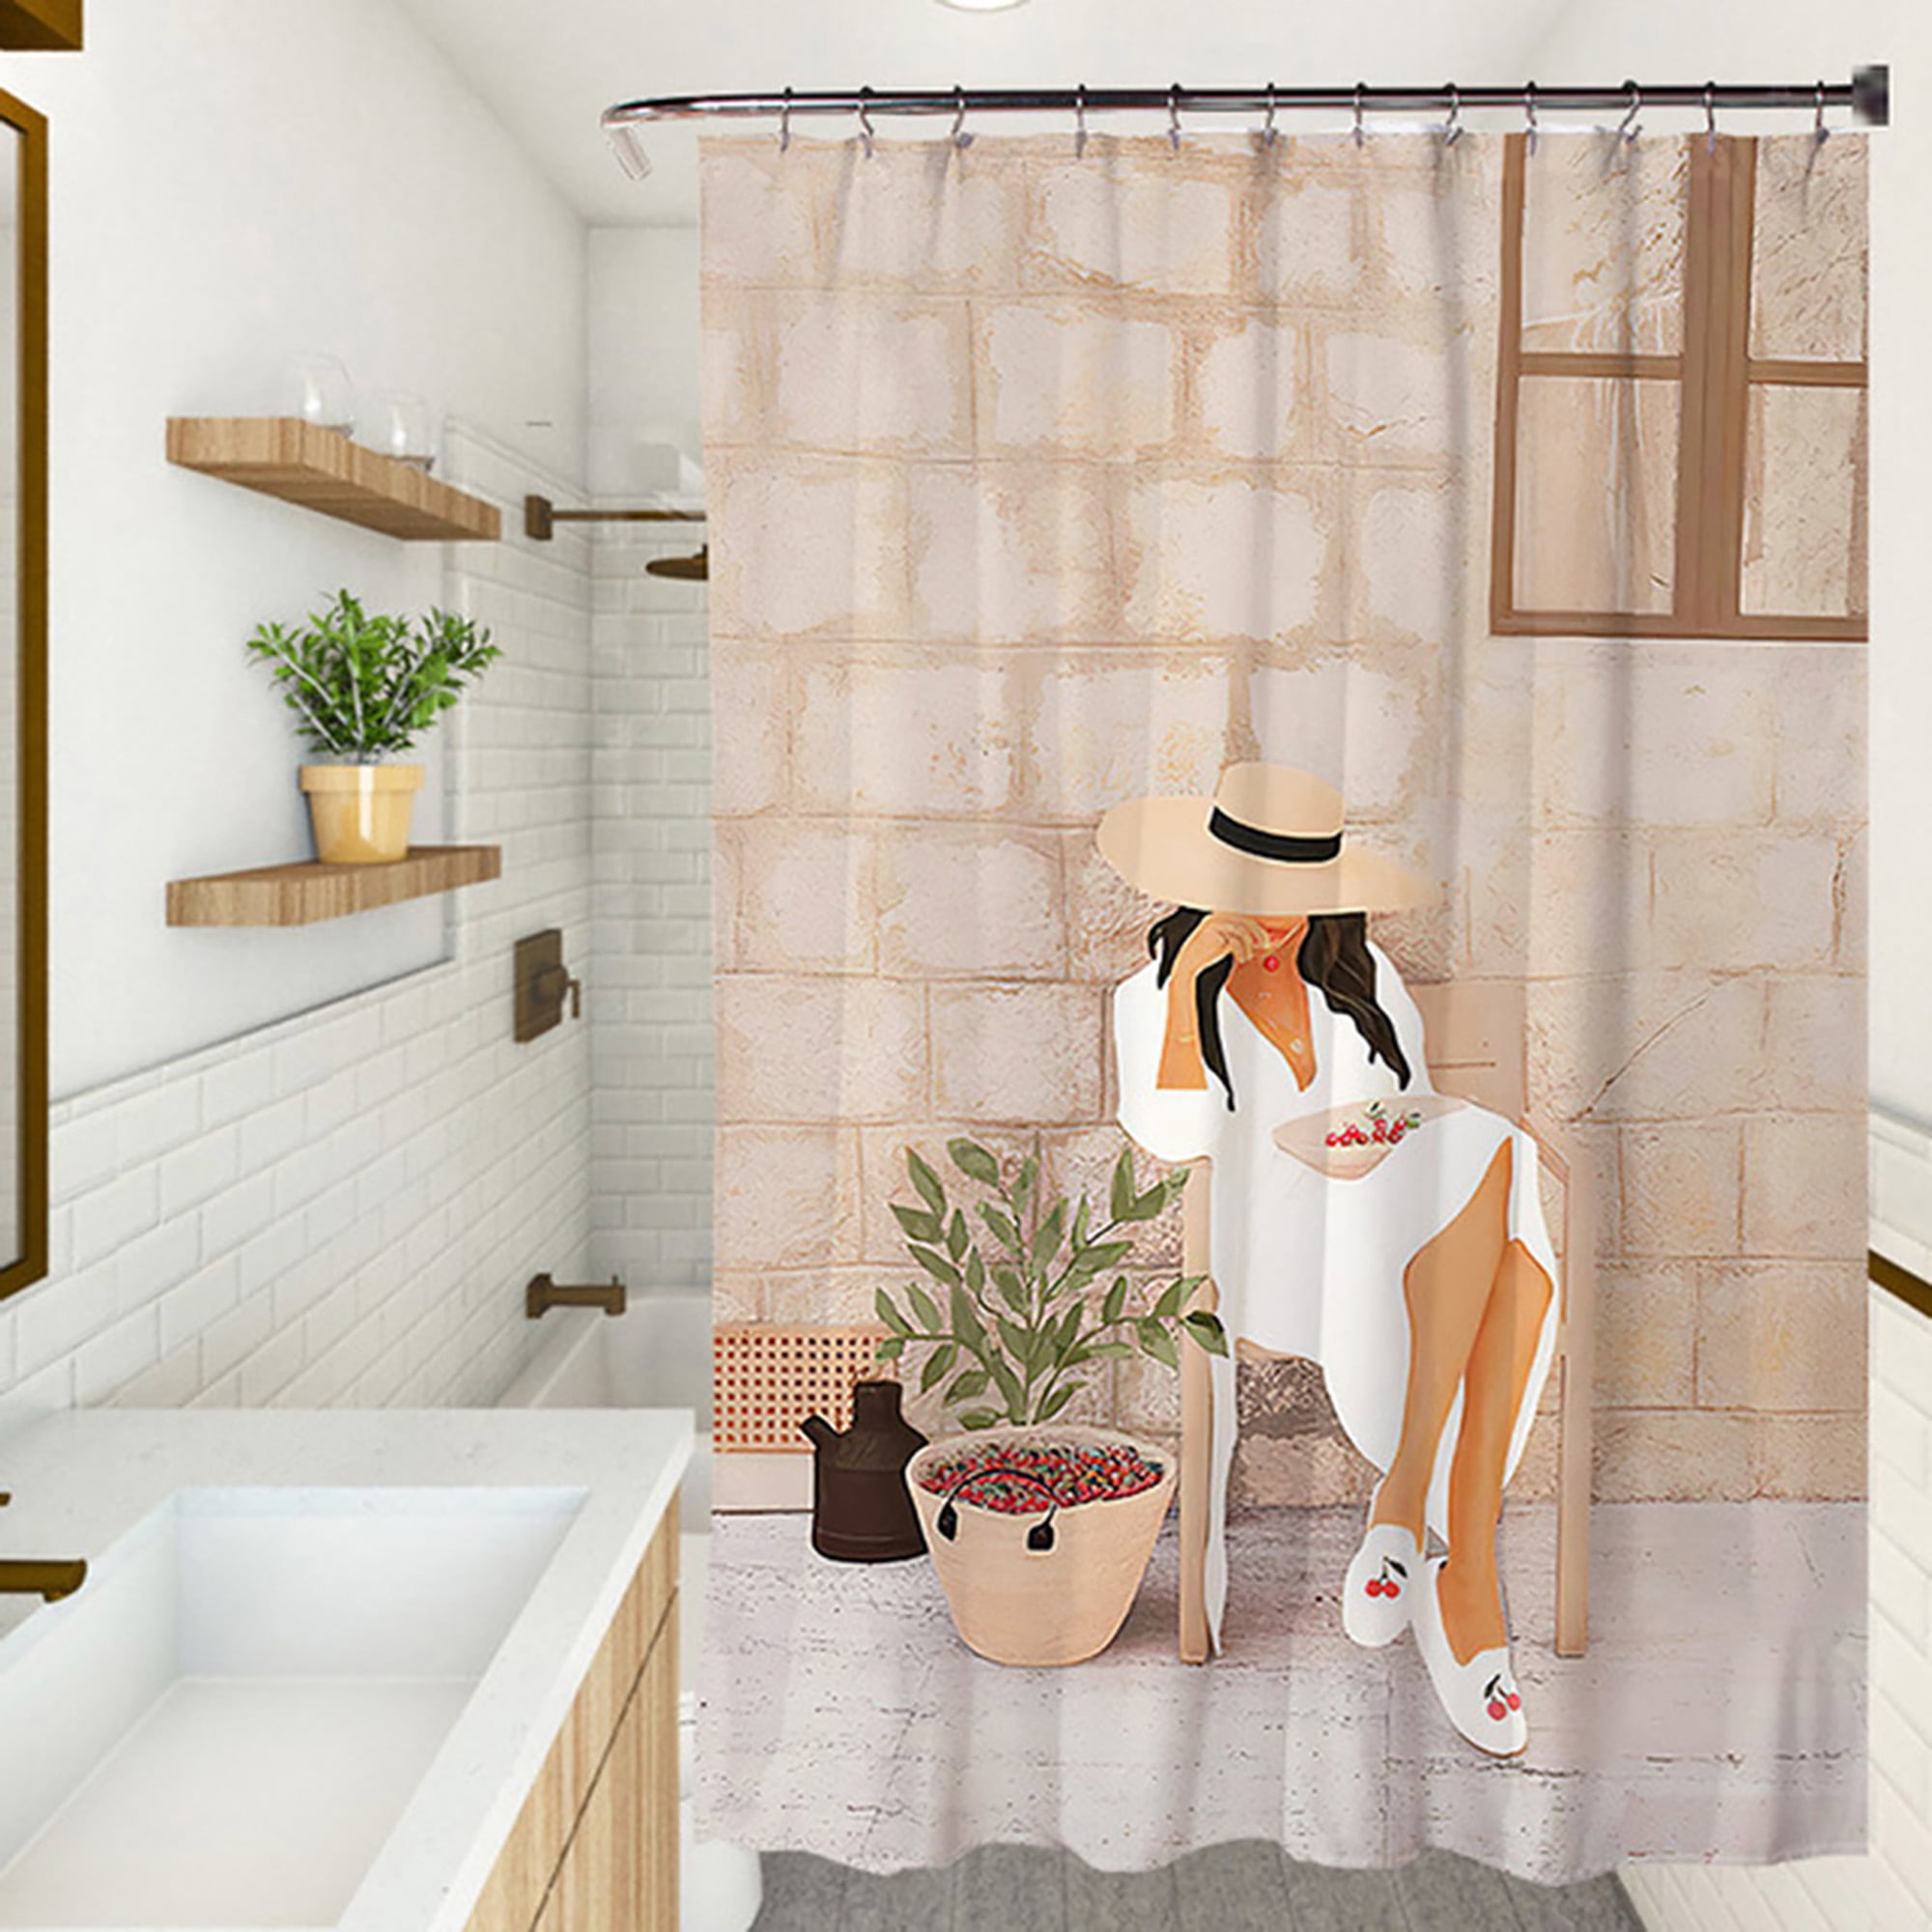 Stalls and Bathtubs BLC Boho Shower Curtain for Bathroom Minimalist Style Farmhouse Shower Curtains 72 x 72 Water Resistant Curtains Stripe Print Hotel Fabric Quality for Bathroom 